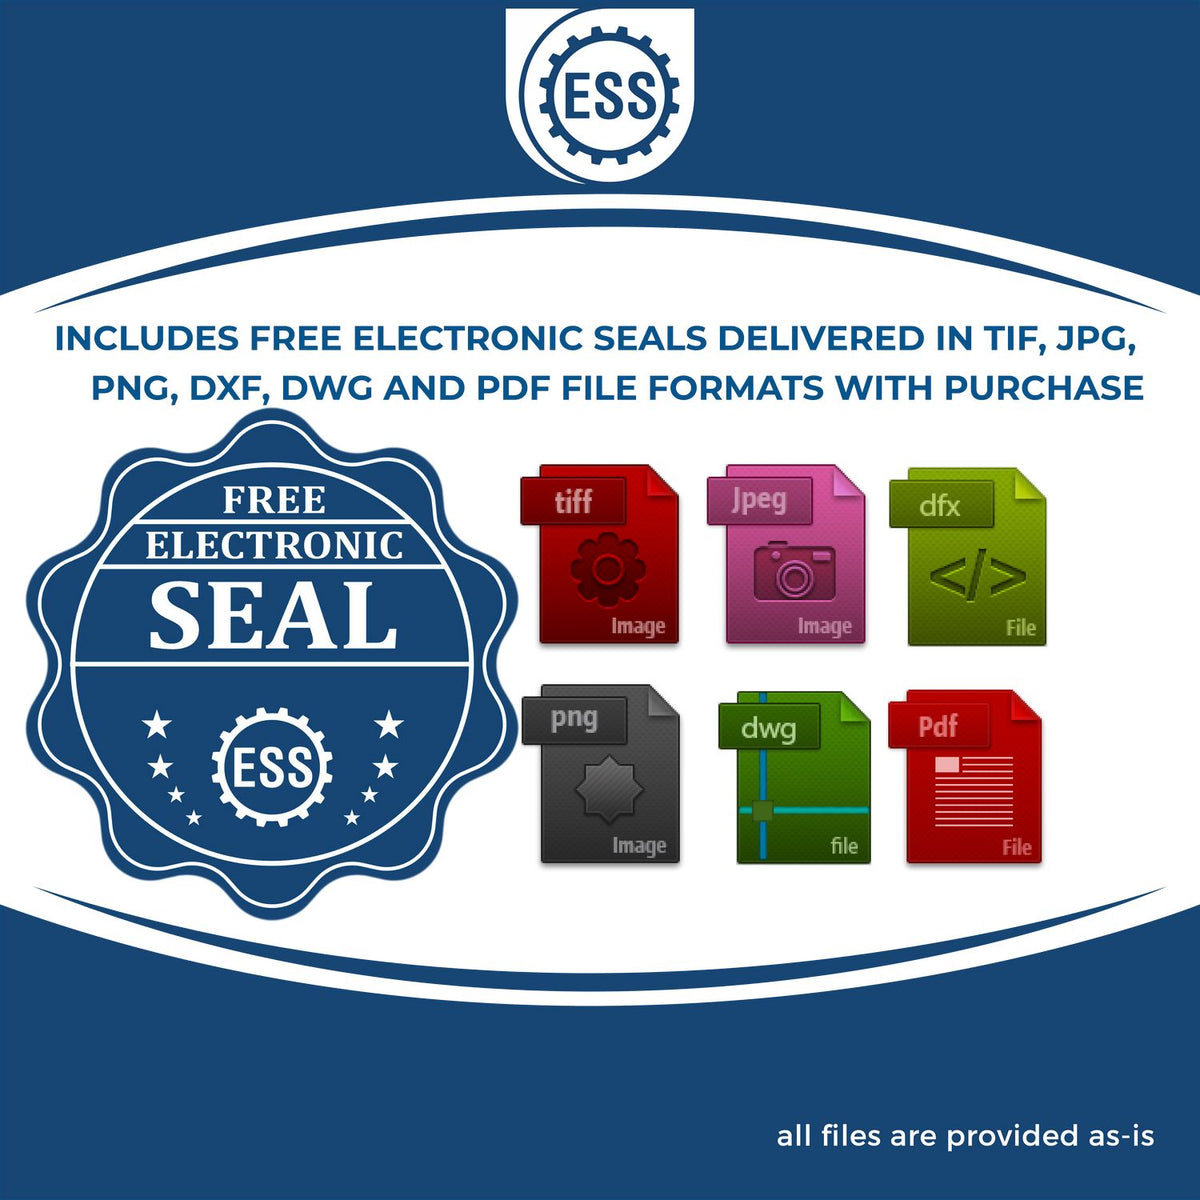 An infographic for the free electronic seal for the PSI Louisiana Notary Stamp illustrating the different file type icons such as DXF, DWG, TIF, JPG and PNG.